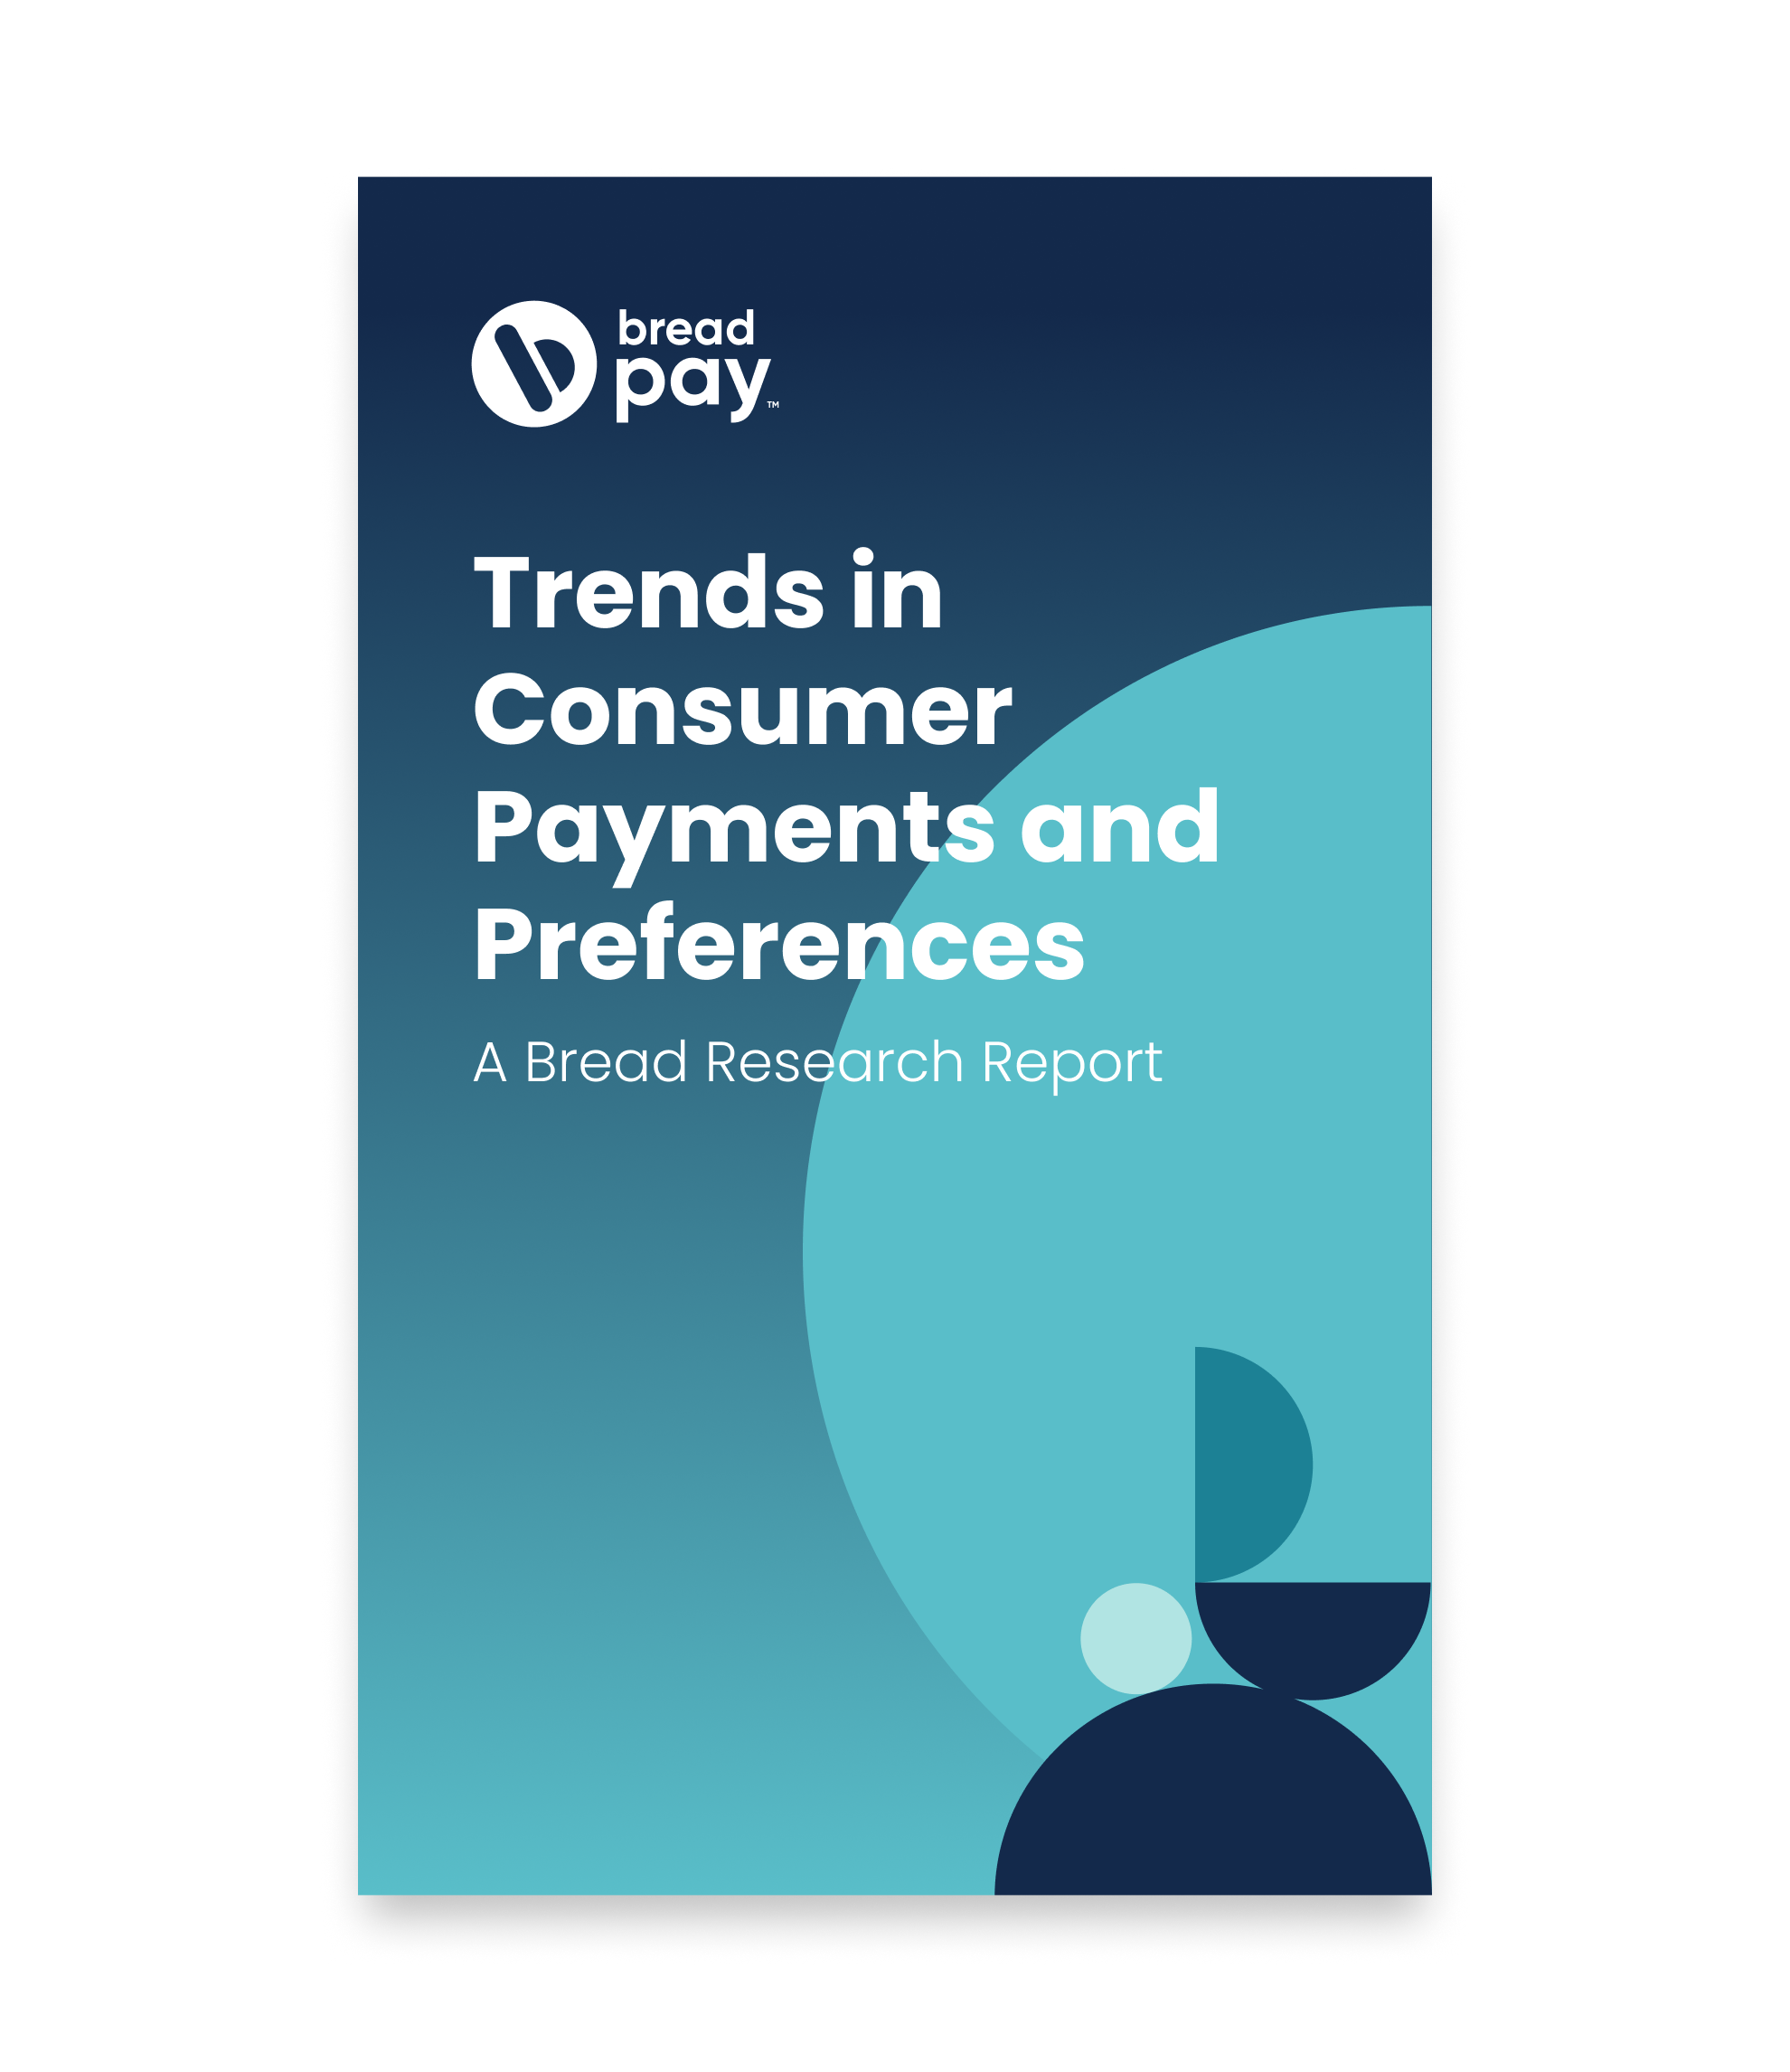 Research Report: Trends in Consumer Payments and Preferences